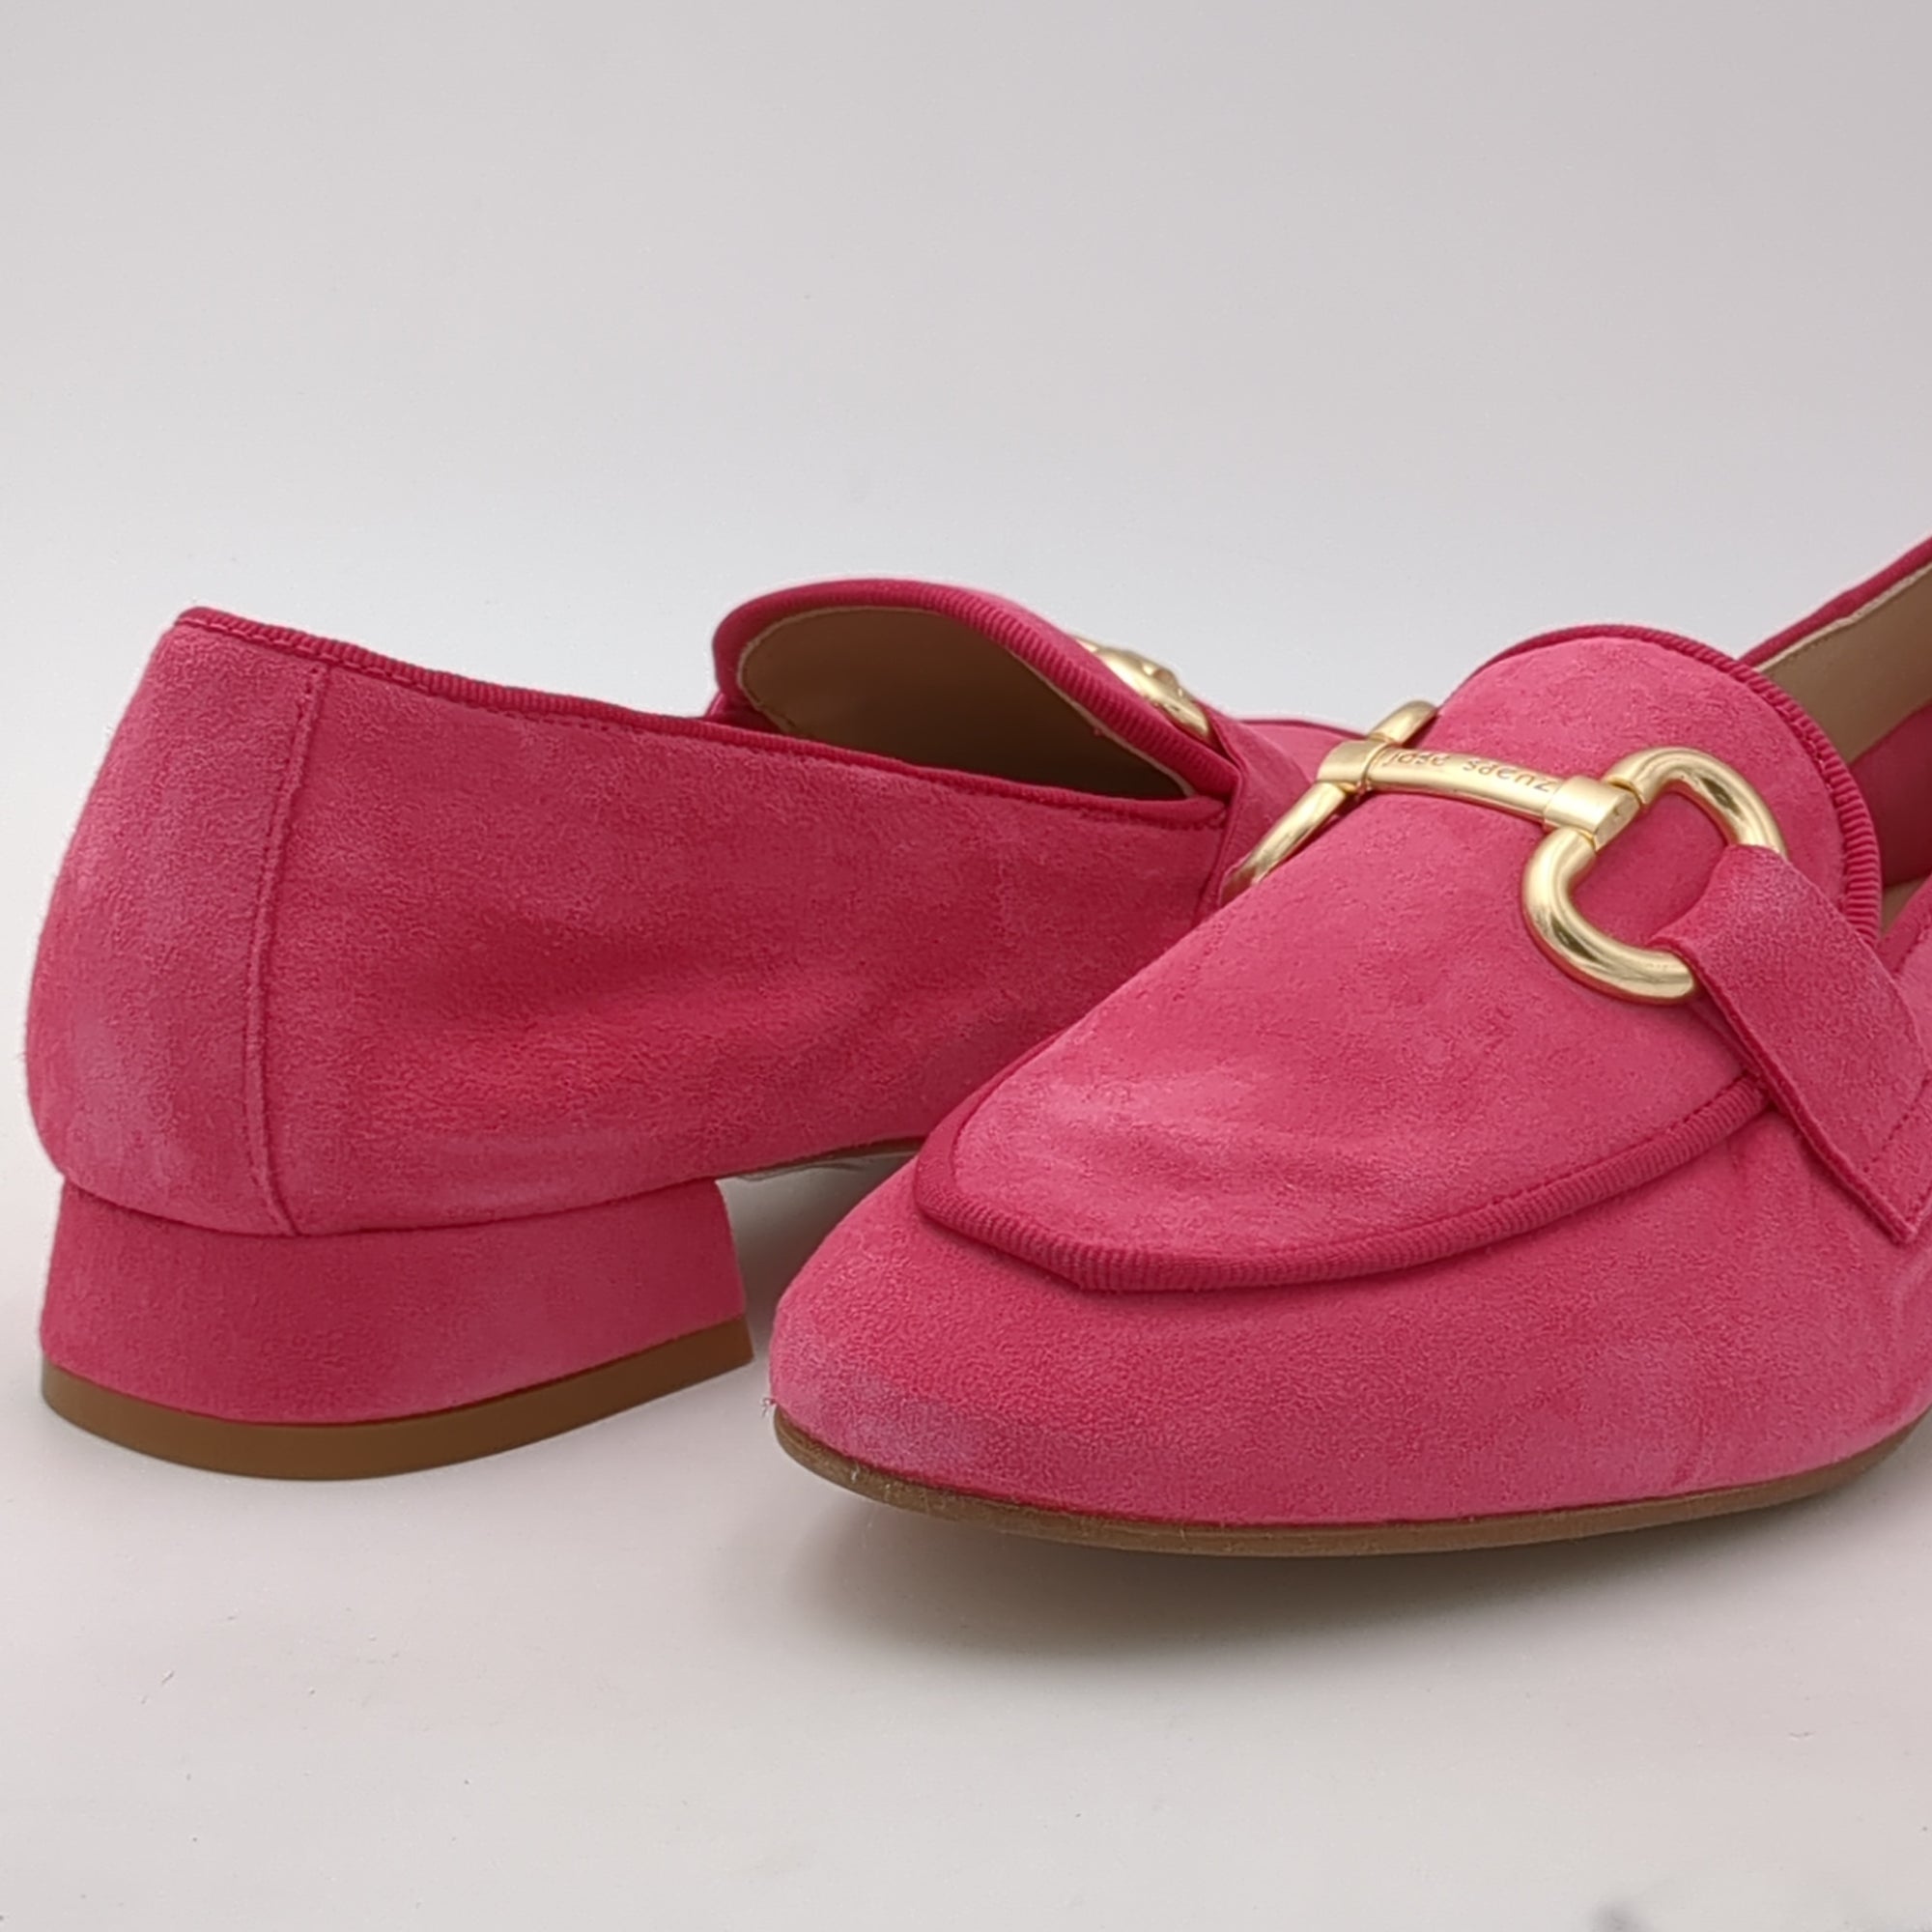 Jose Saenz Fuchsia Suede Loafers - Comfort & Gold Chain Detail